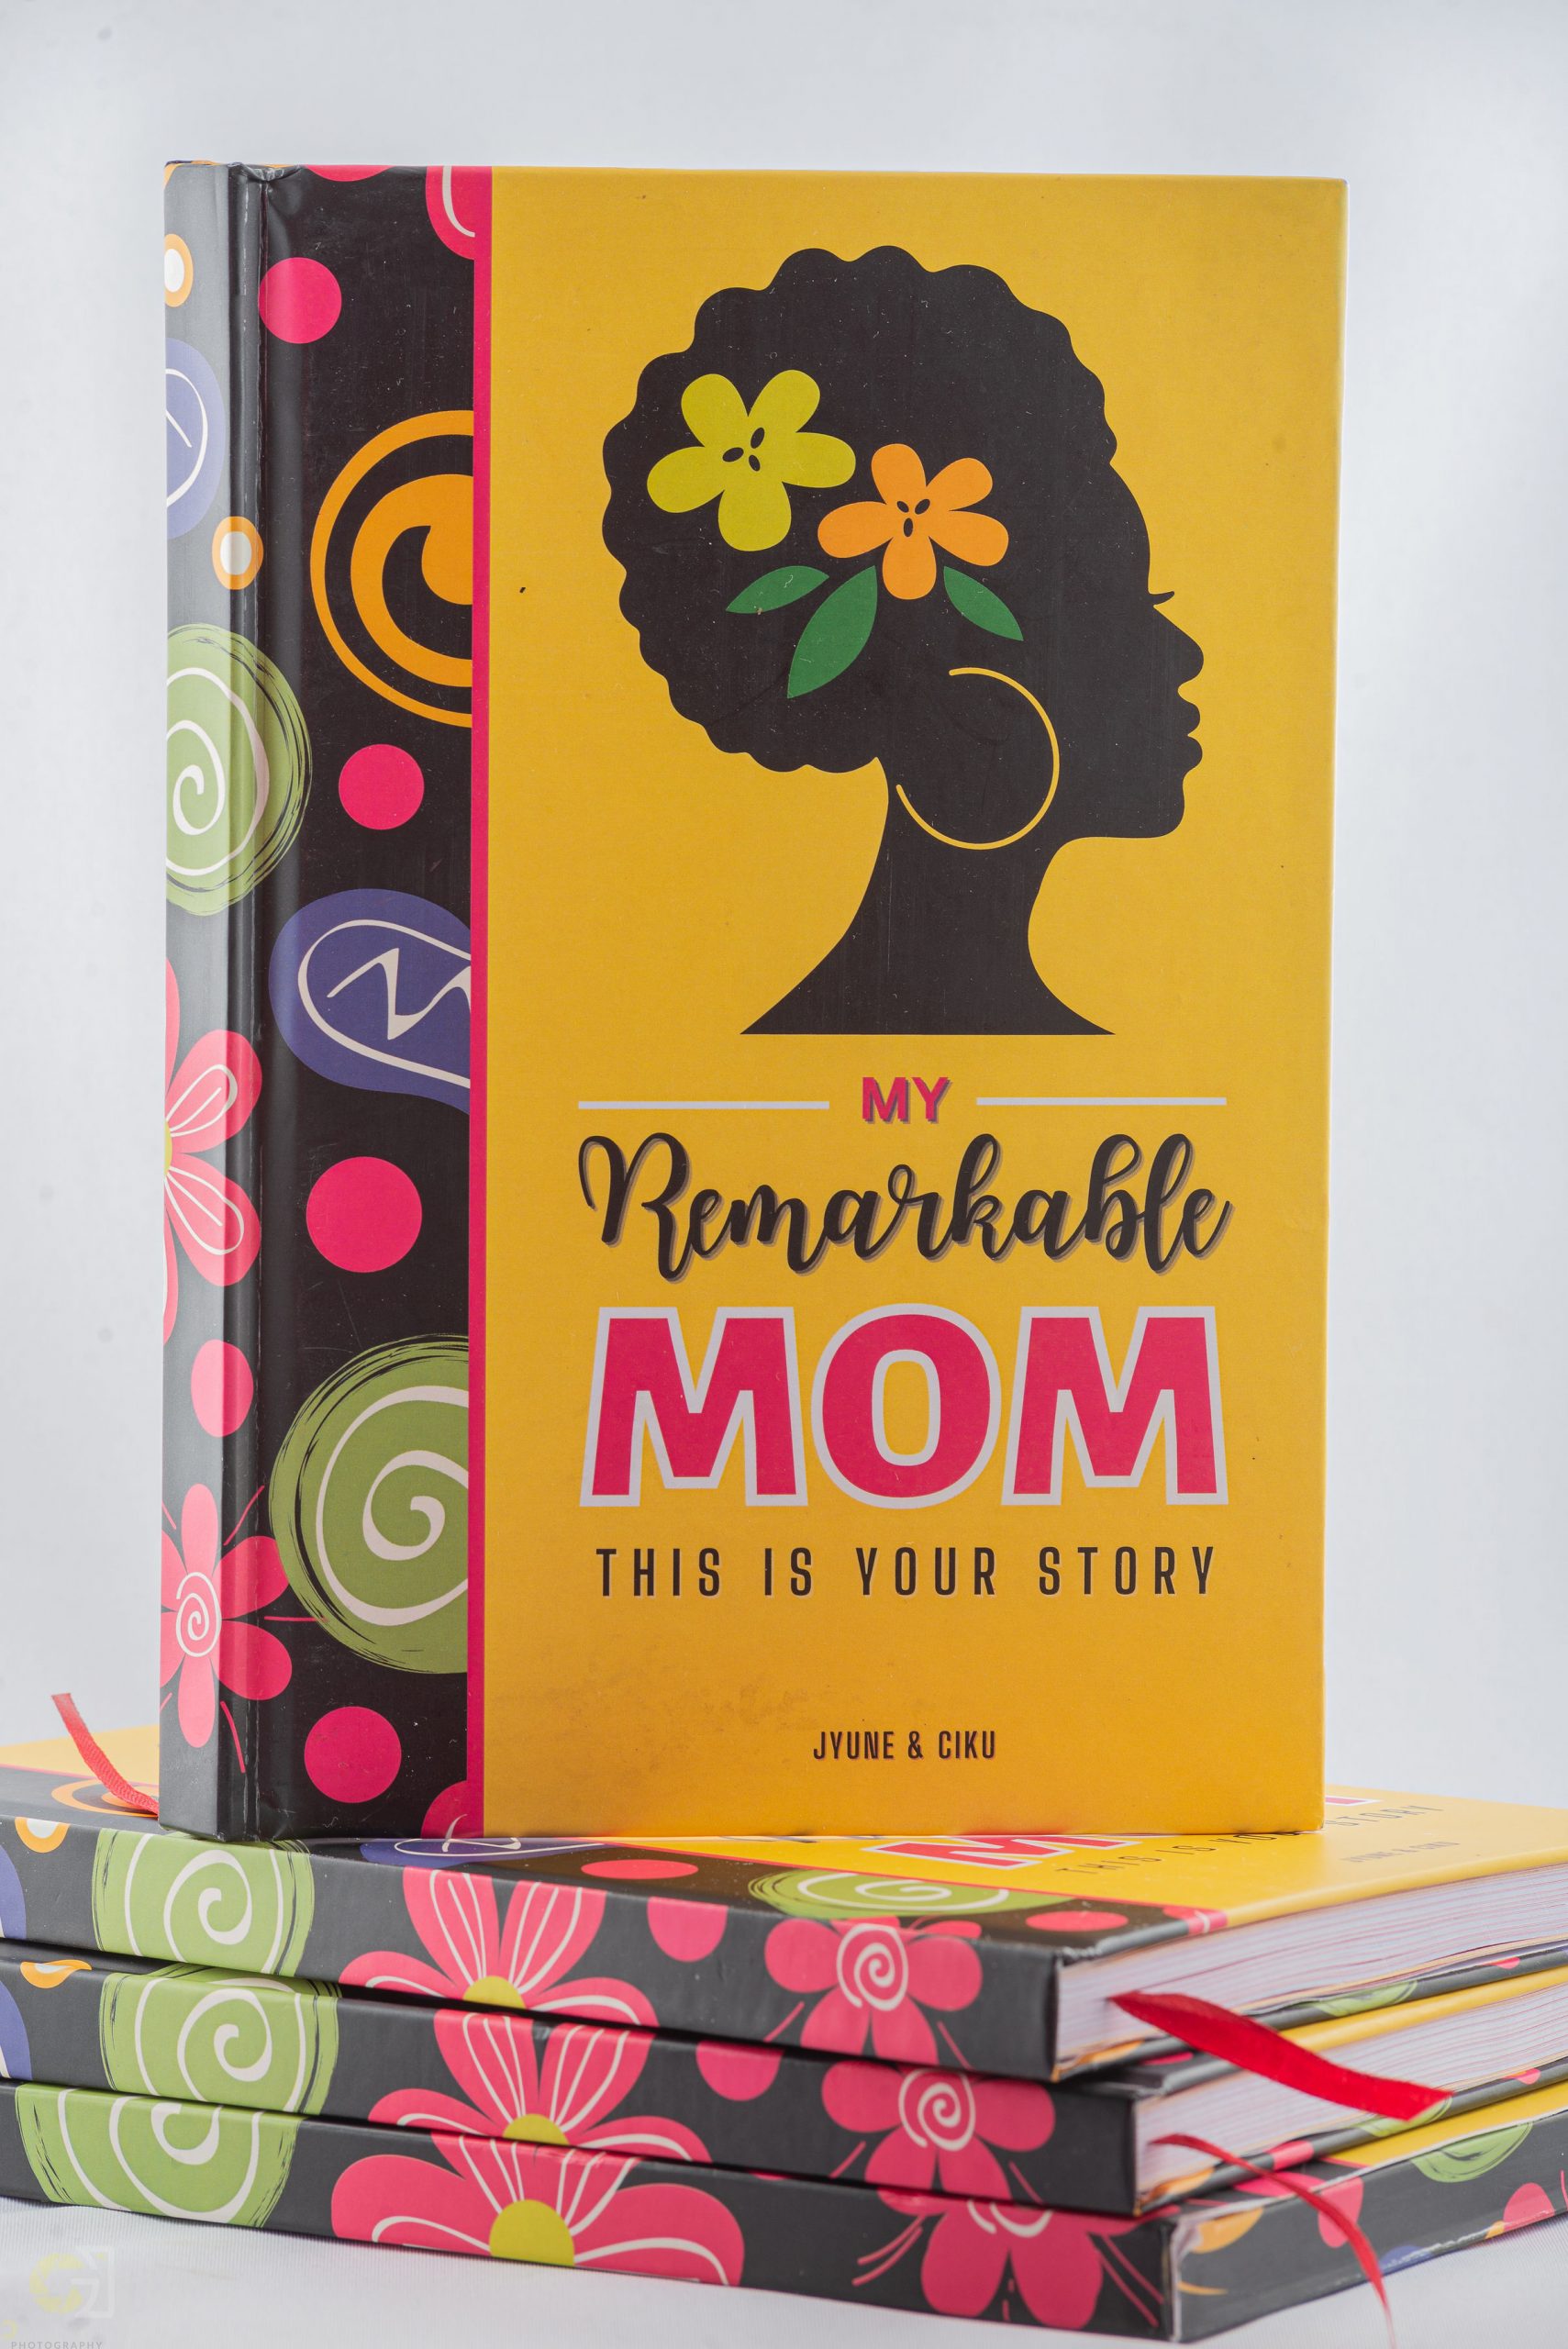 A handwritten biography for every mother/woman - because her story is worth telling.